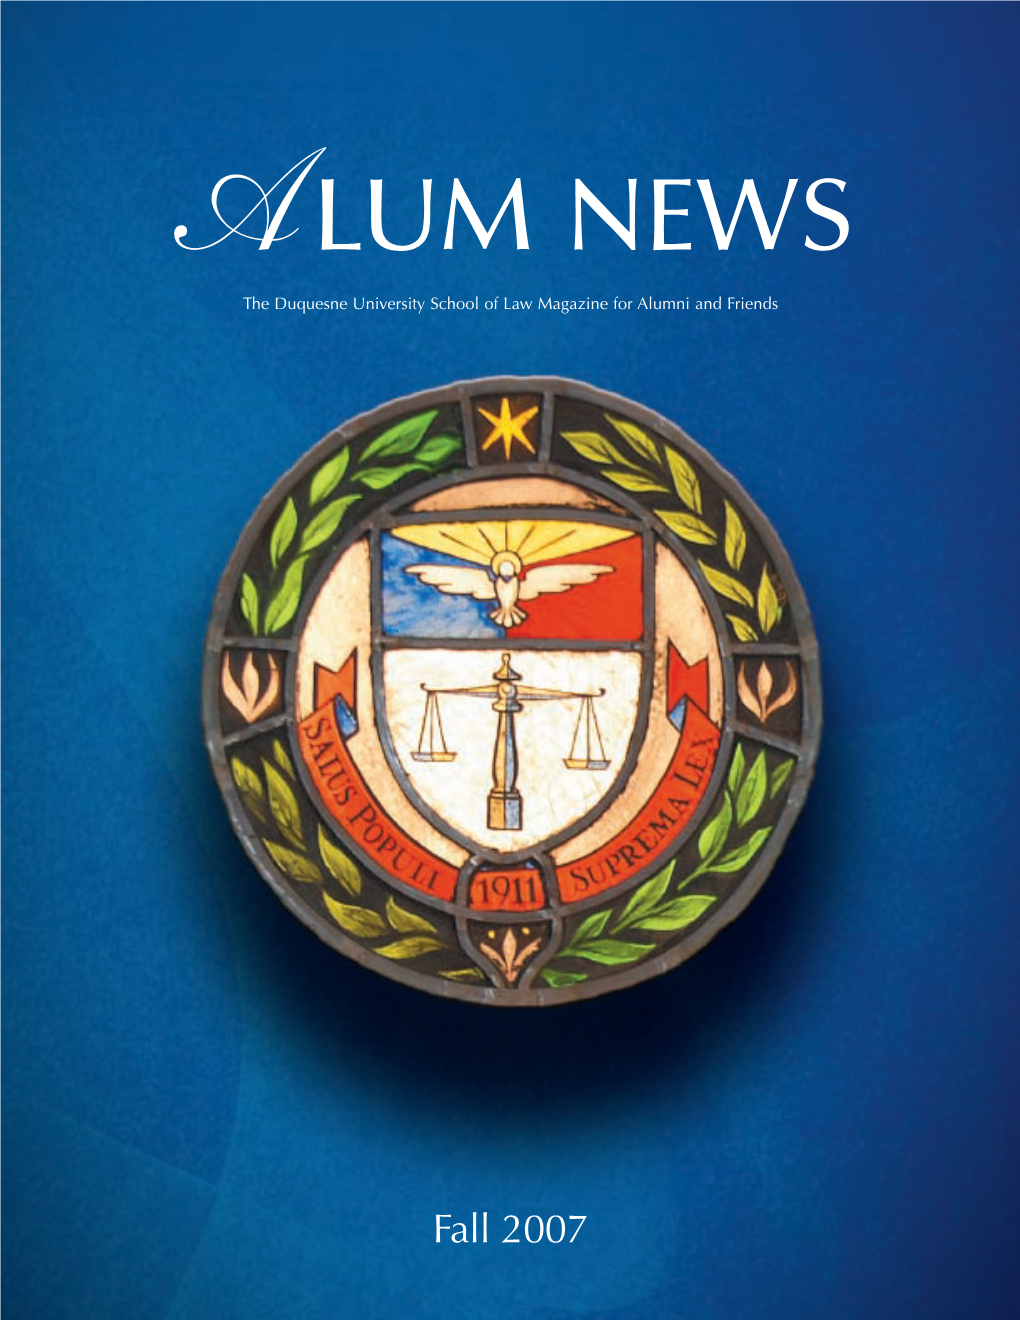 A LUM NEWS the Duquesne University School of Law Magazine for Alumni and Friends